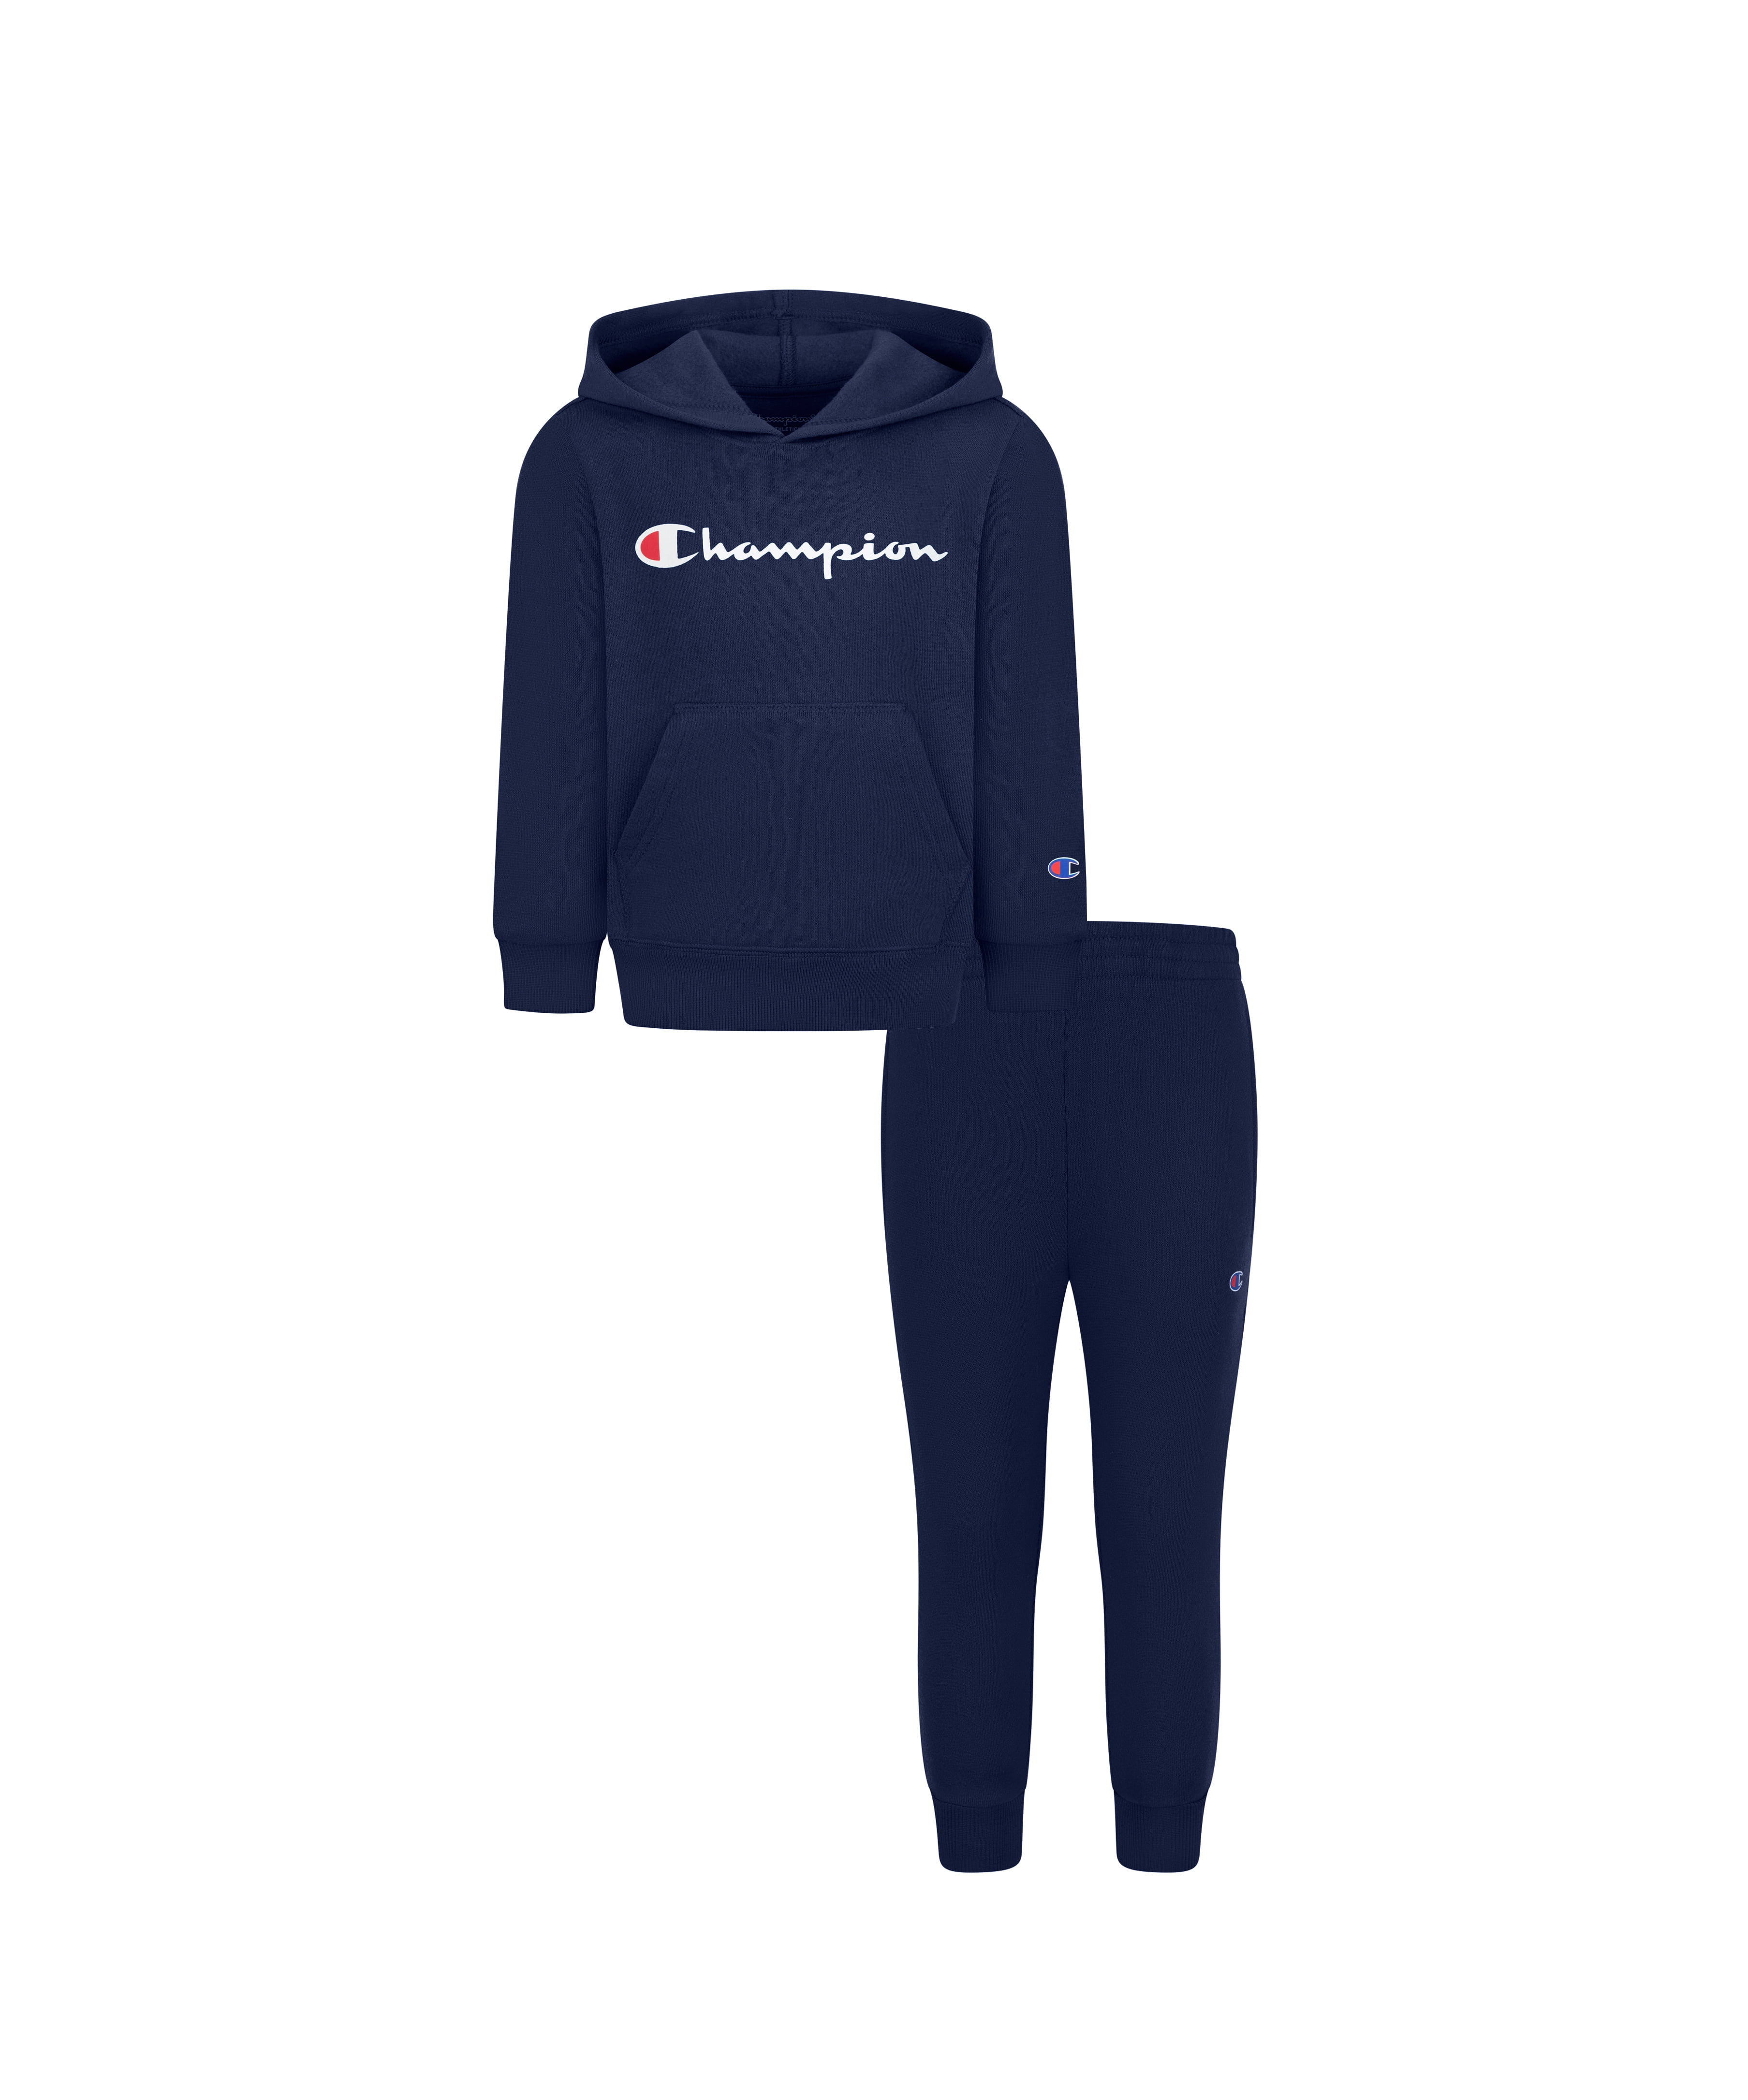 Champion Toddler Boys' Matching Hoodie and Jogger Set, 2-Piece